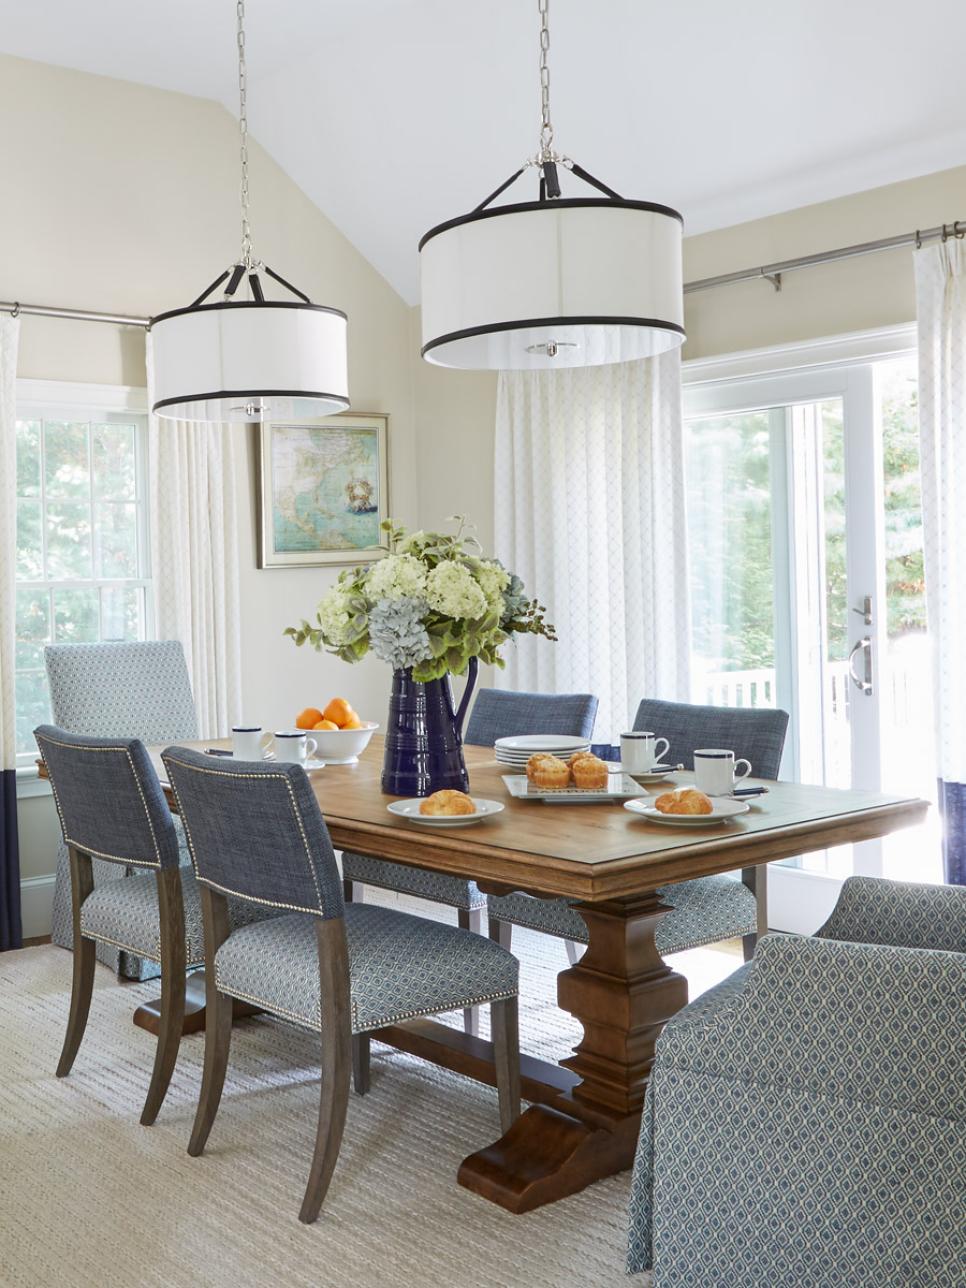 Transitional Dining Room With Blue, Transitional Dining Room Table And Chairs